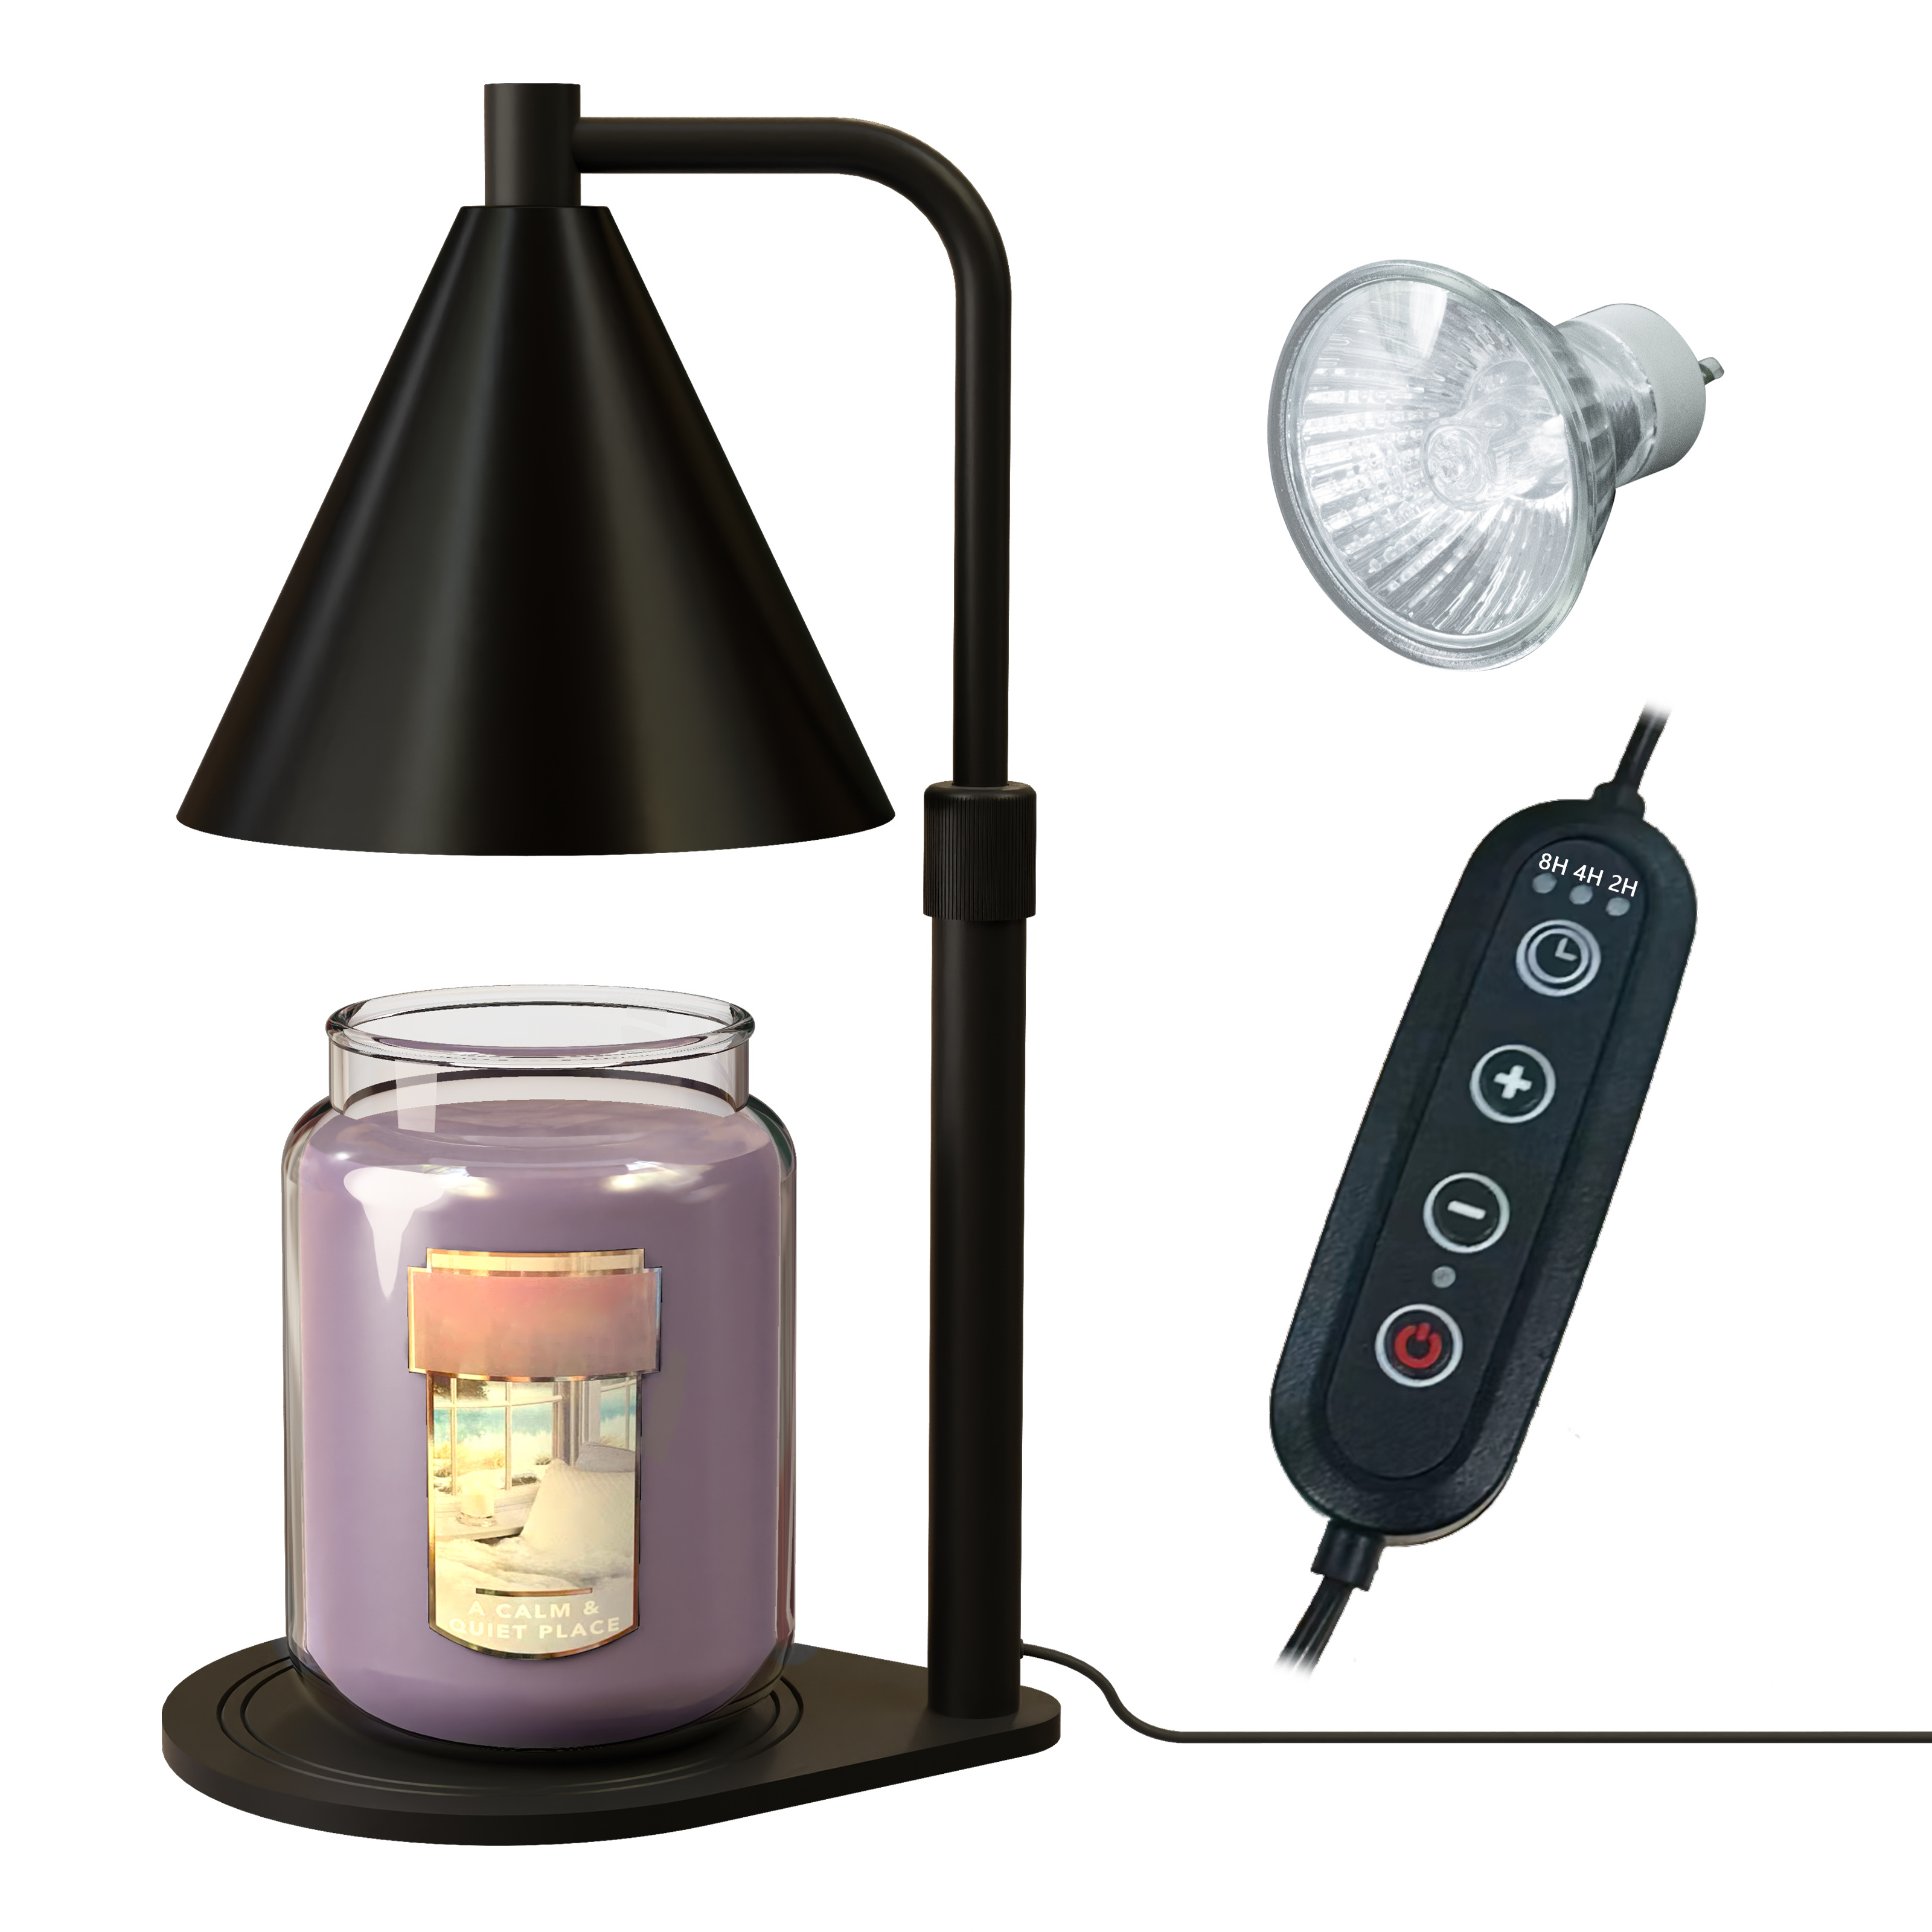 Electric Candle Warmers Vs Burning Candles